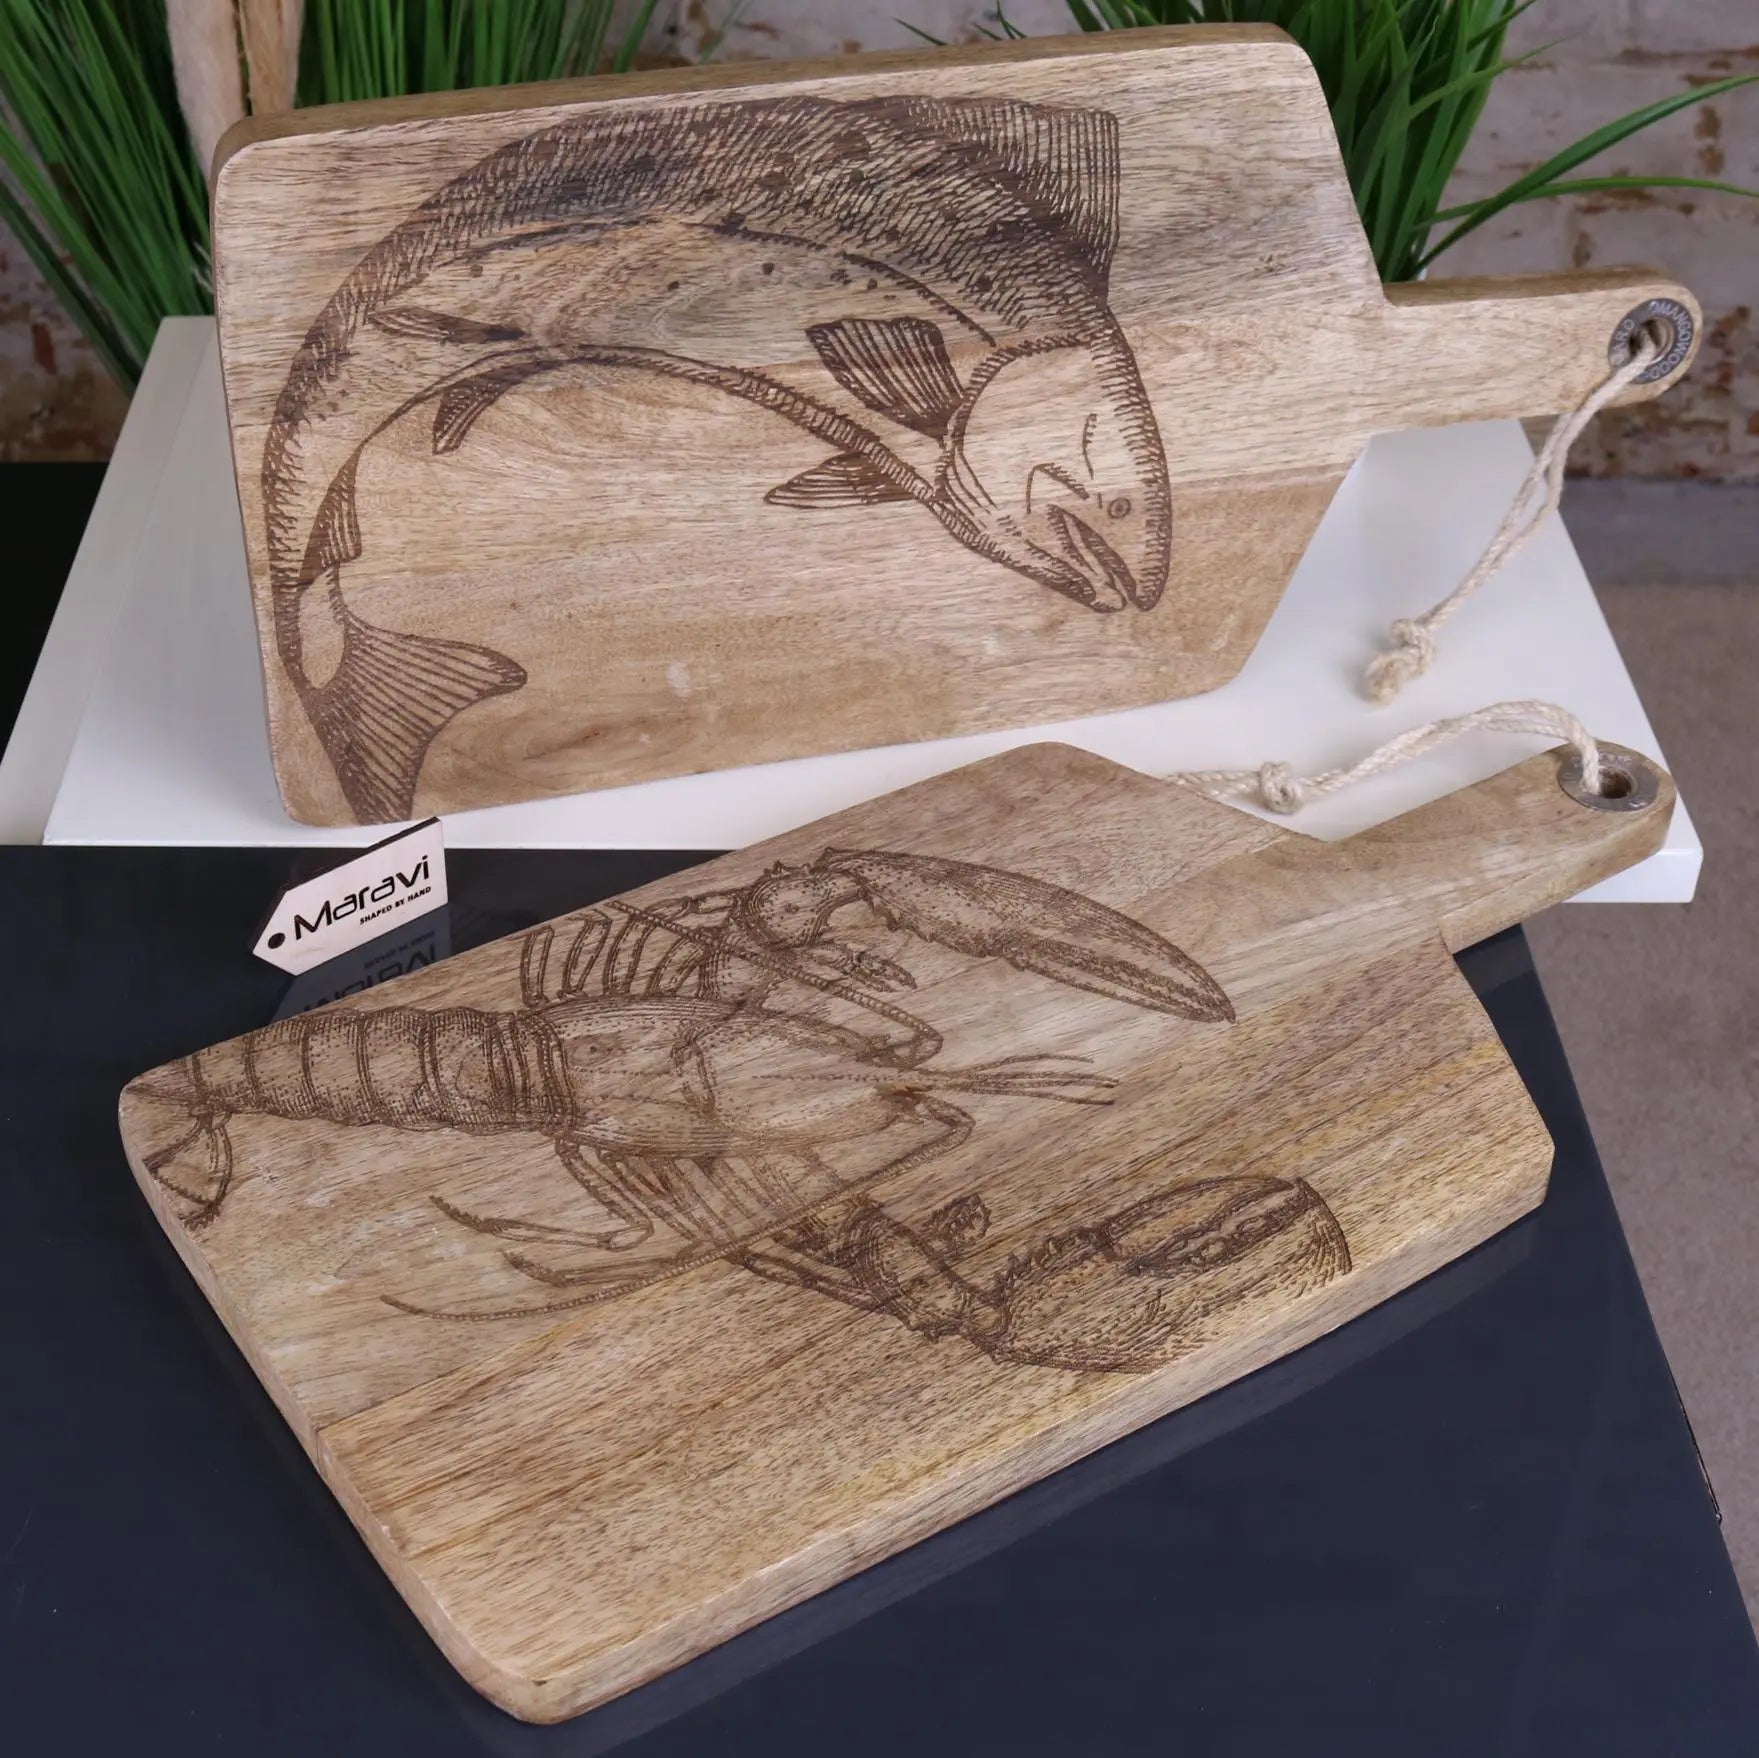 Rateka 50cm Engraved Seafood Serving Board Lobster and Fish Main Image